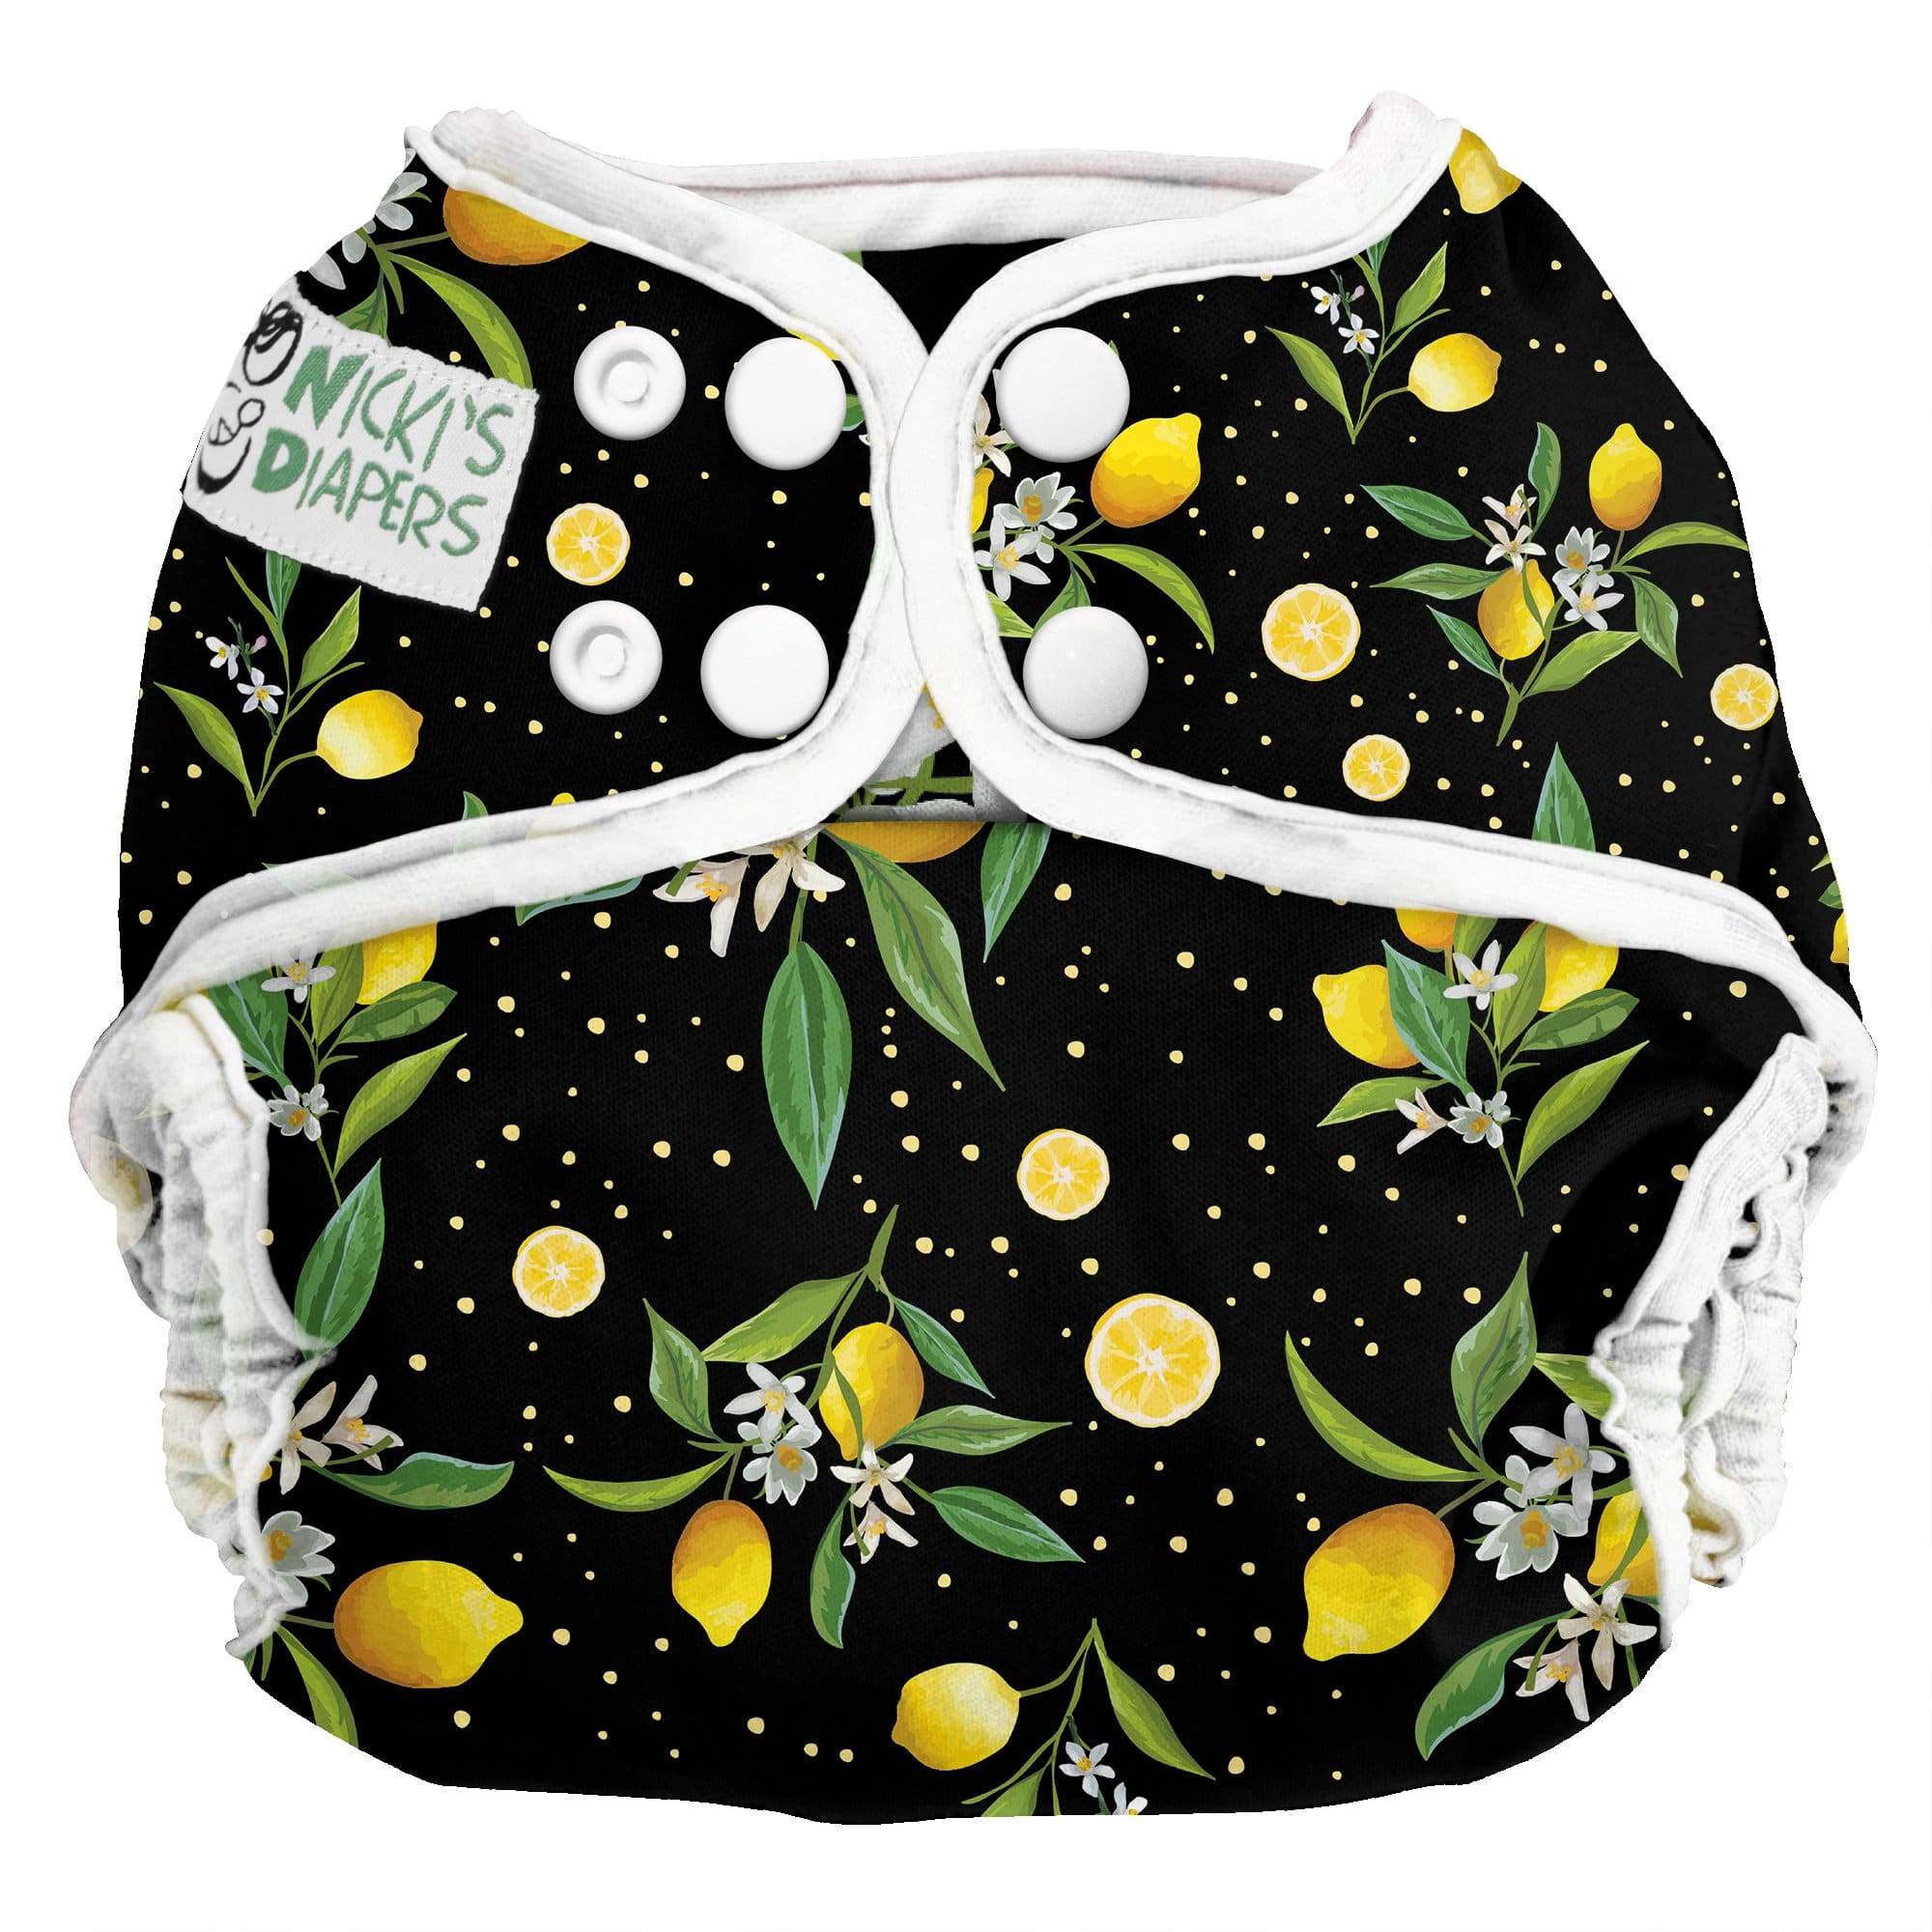 Nicki's Diapers Snap Cloth Diaper Cover Squeeze The Day / One Size